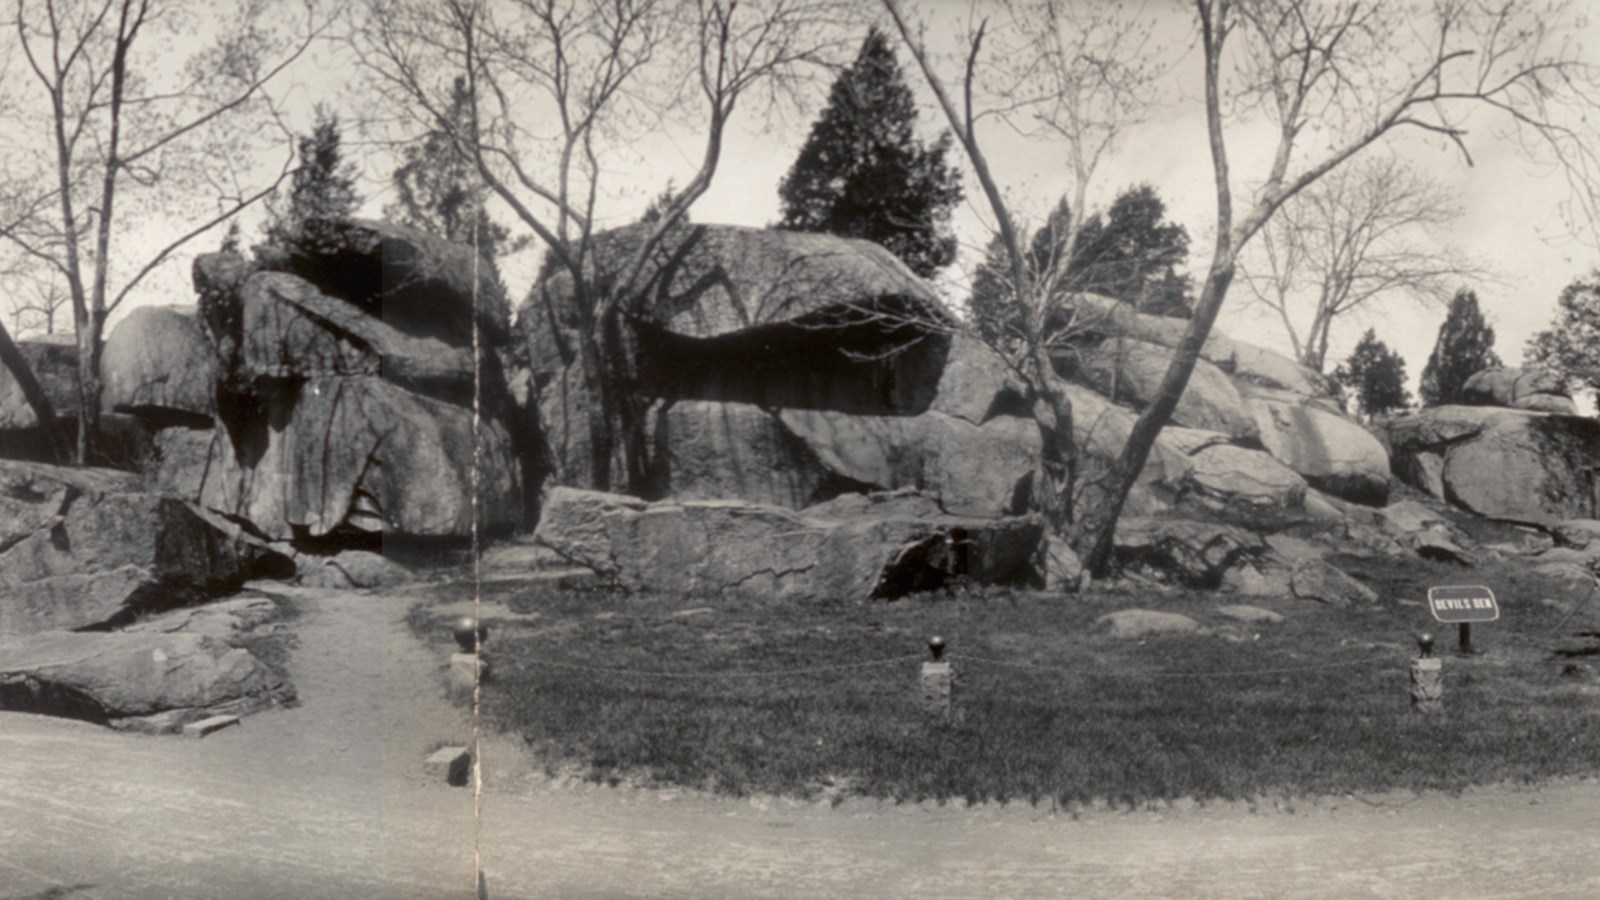 Historical photo of a rock formation with large boulders next to a road.